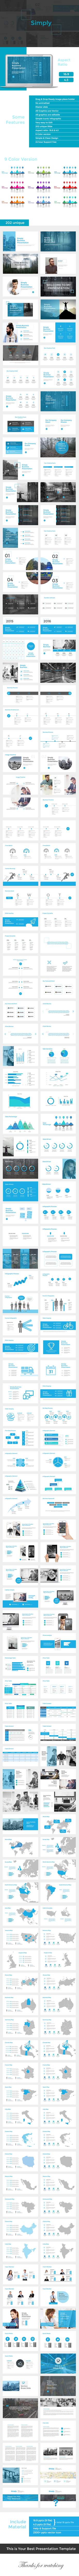 Simply Business Powerpoint Presentation Template